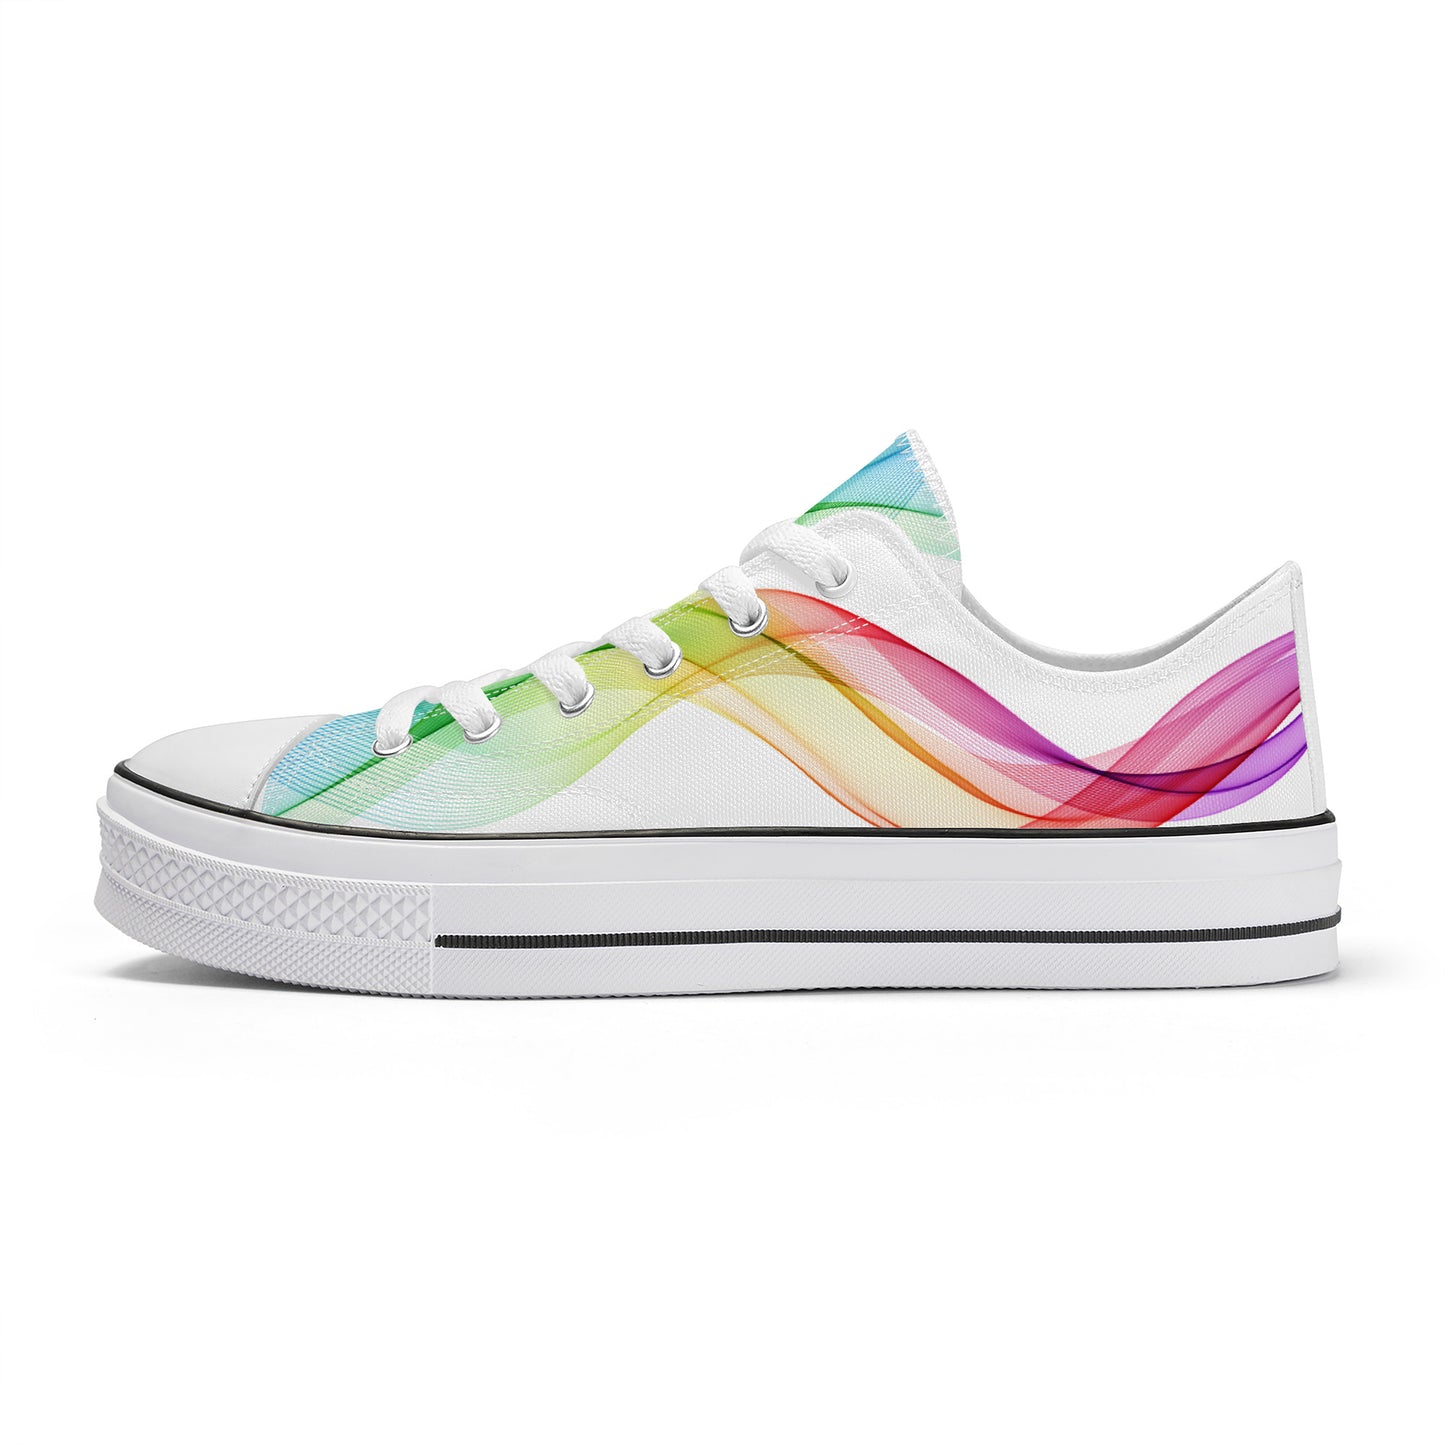 Pride Low Top Canvas Converse Style Shoes - White